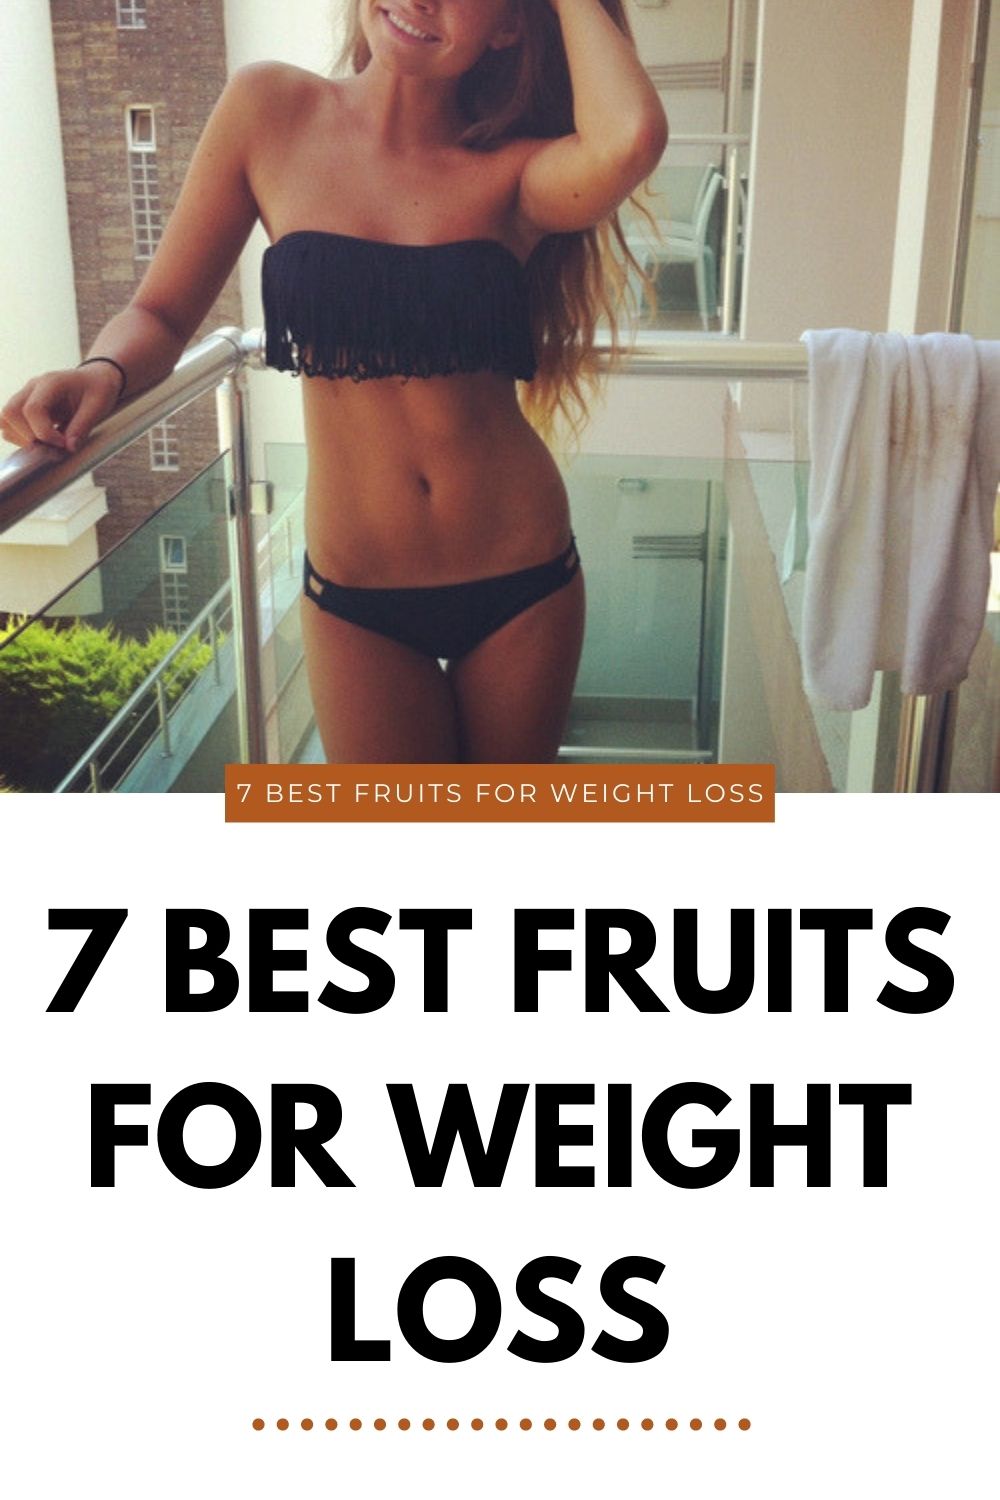 You are currently viewing 7 Best Fruits For Weight Loss.